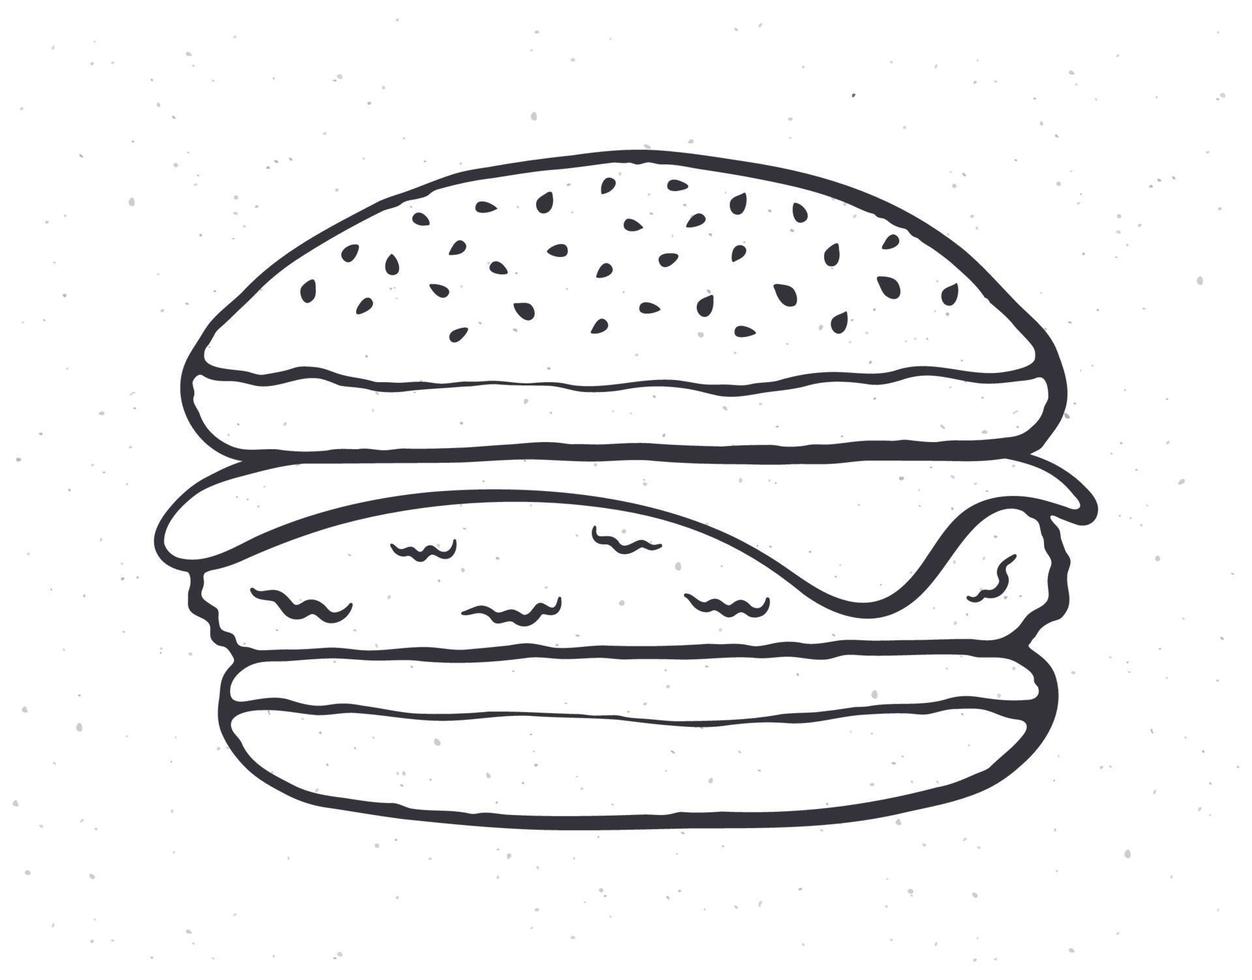 Doodle illustration of cheeseburger vector